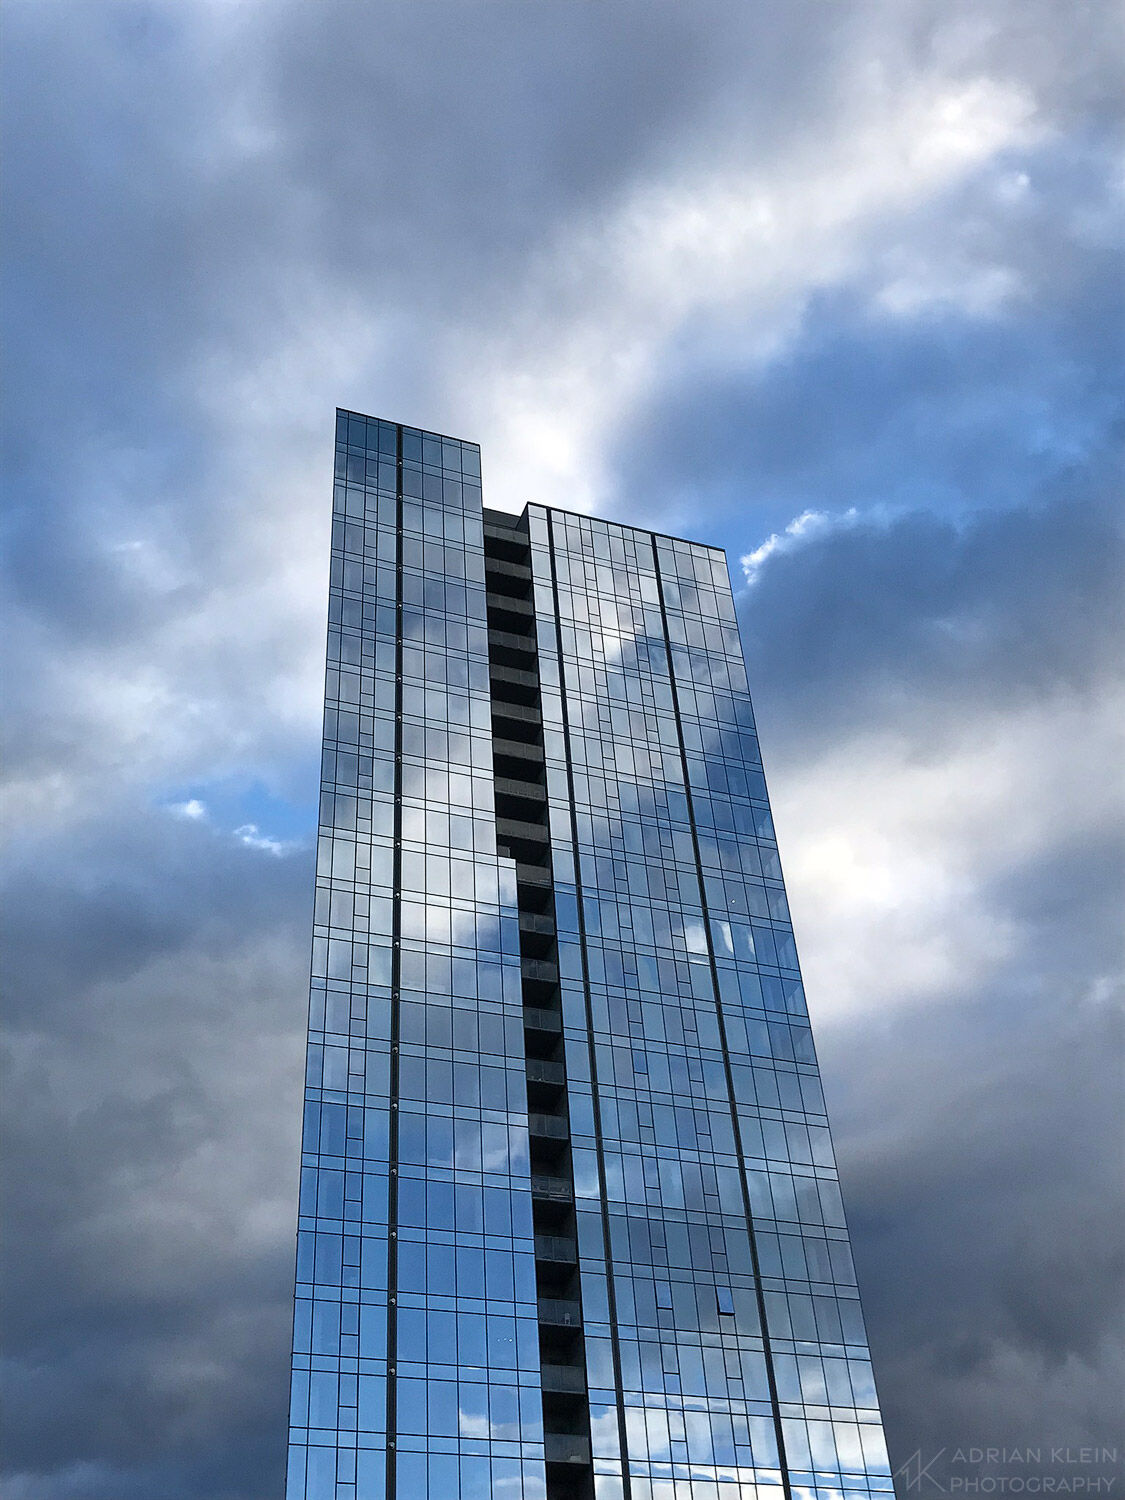 Glass building in NW Portland reflecting the dramatic sky